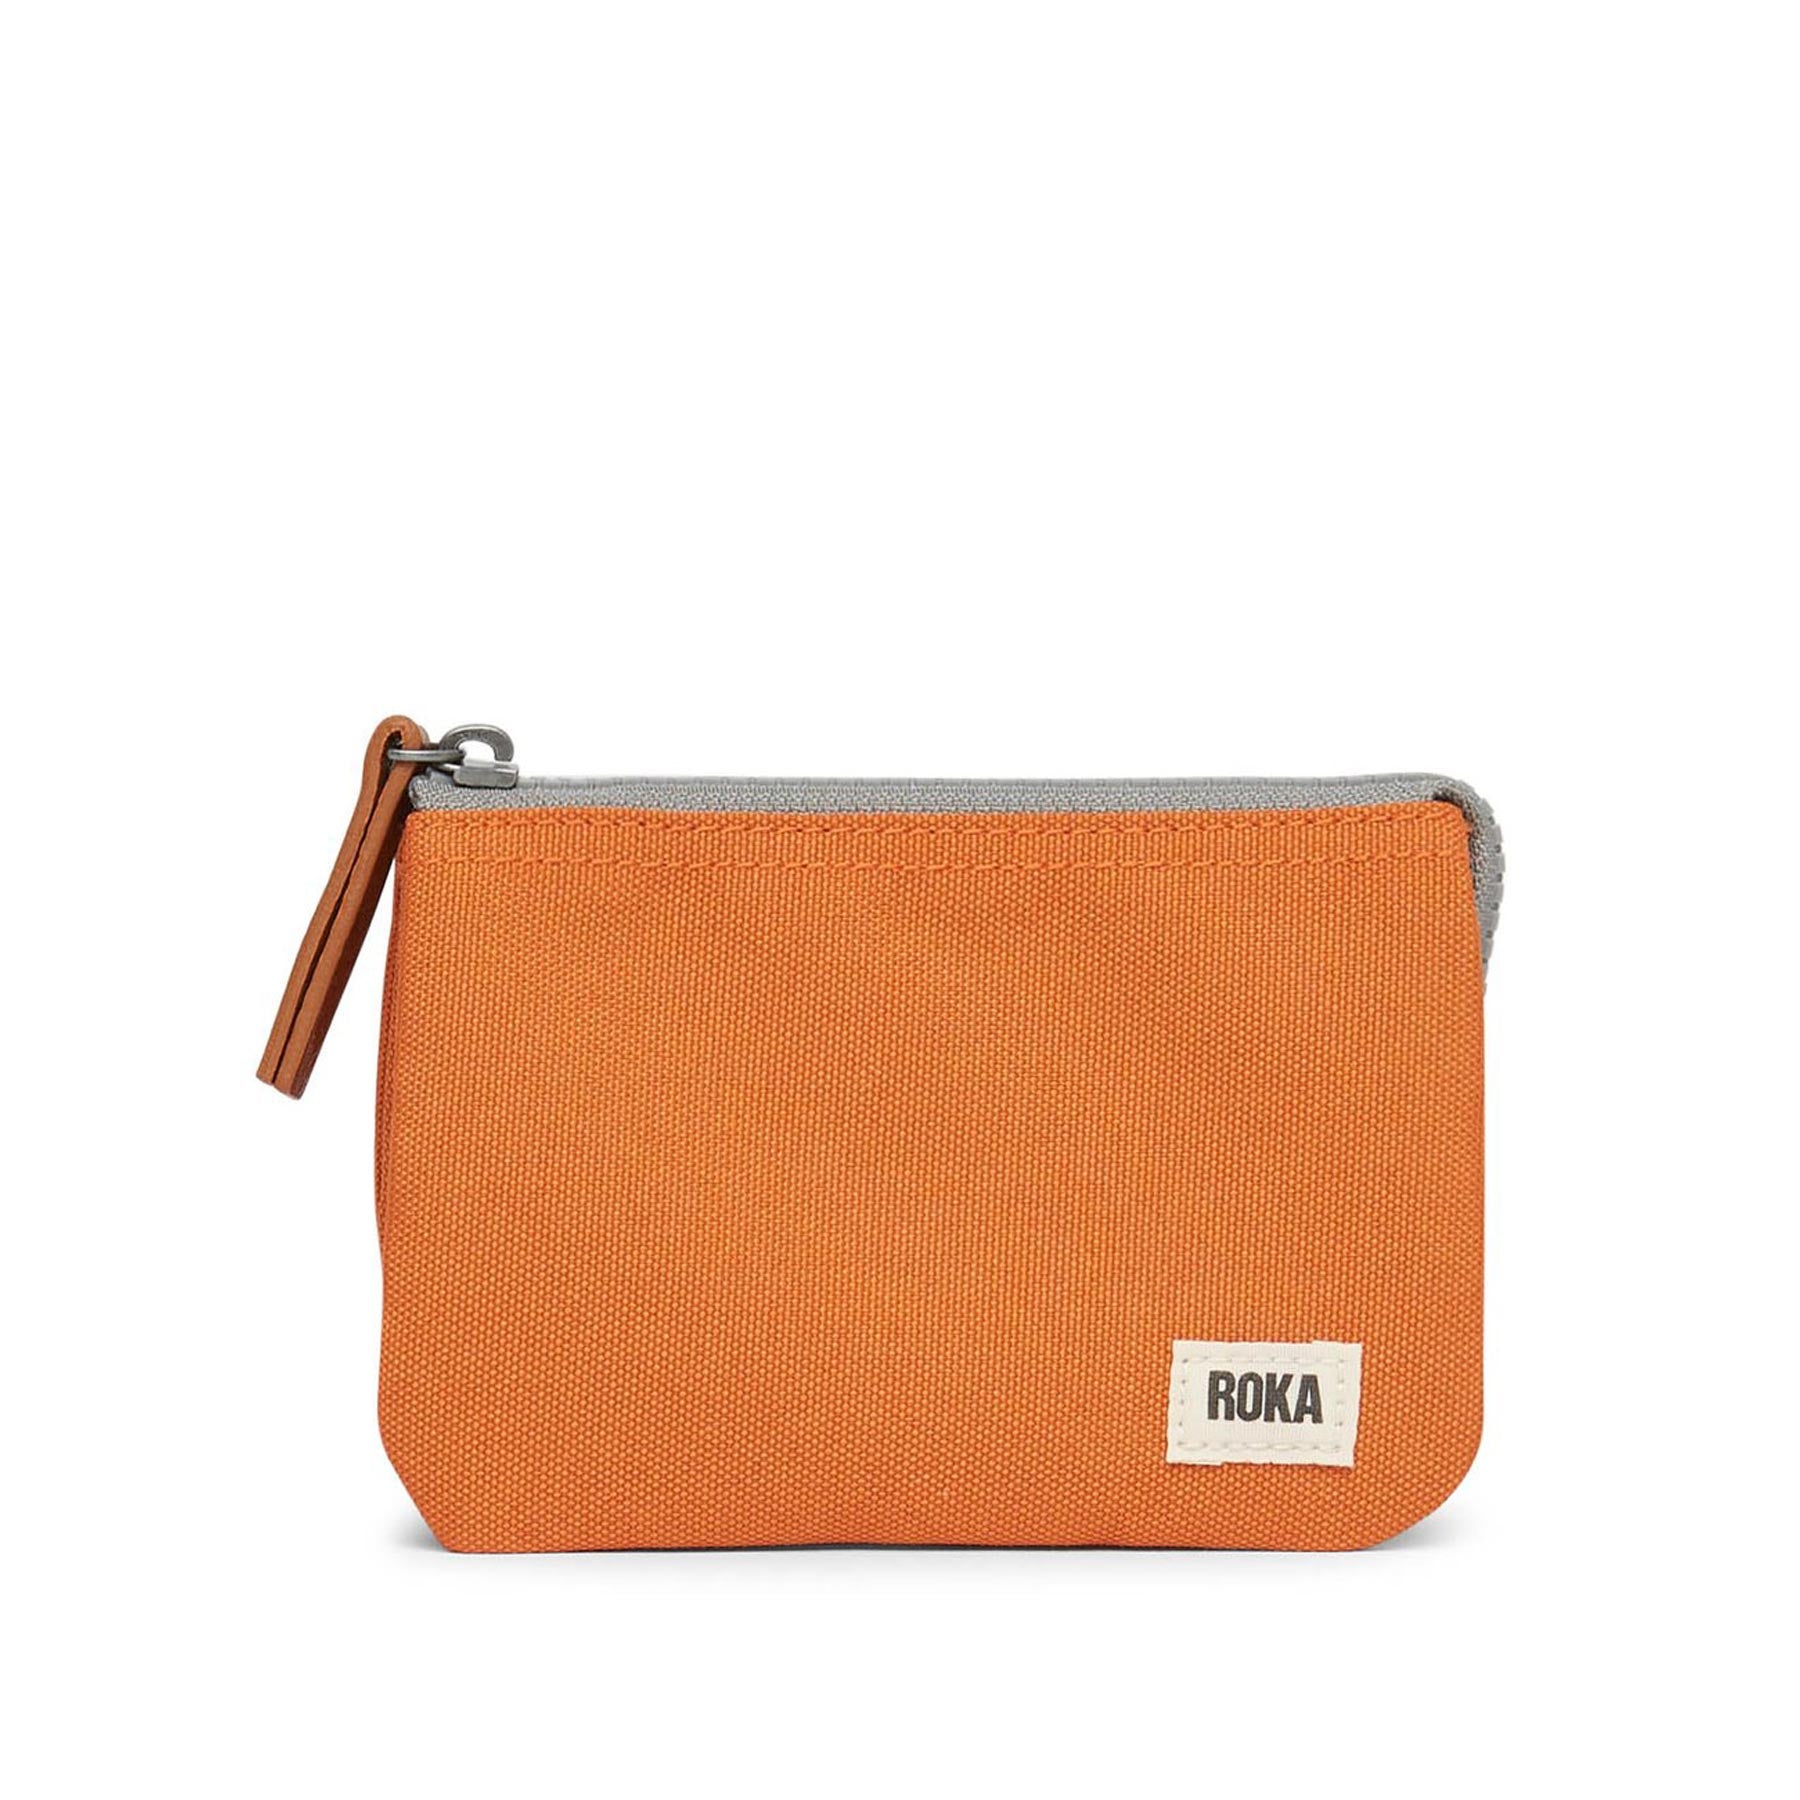 Carnaby atomic orange small wallet